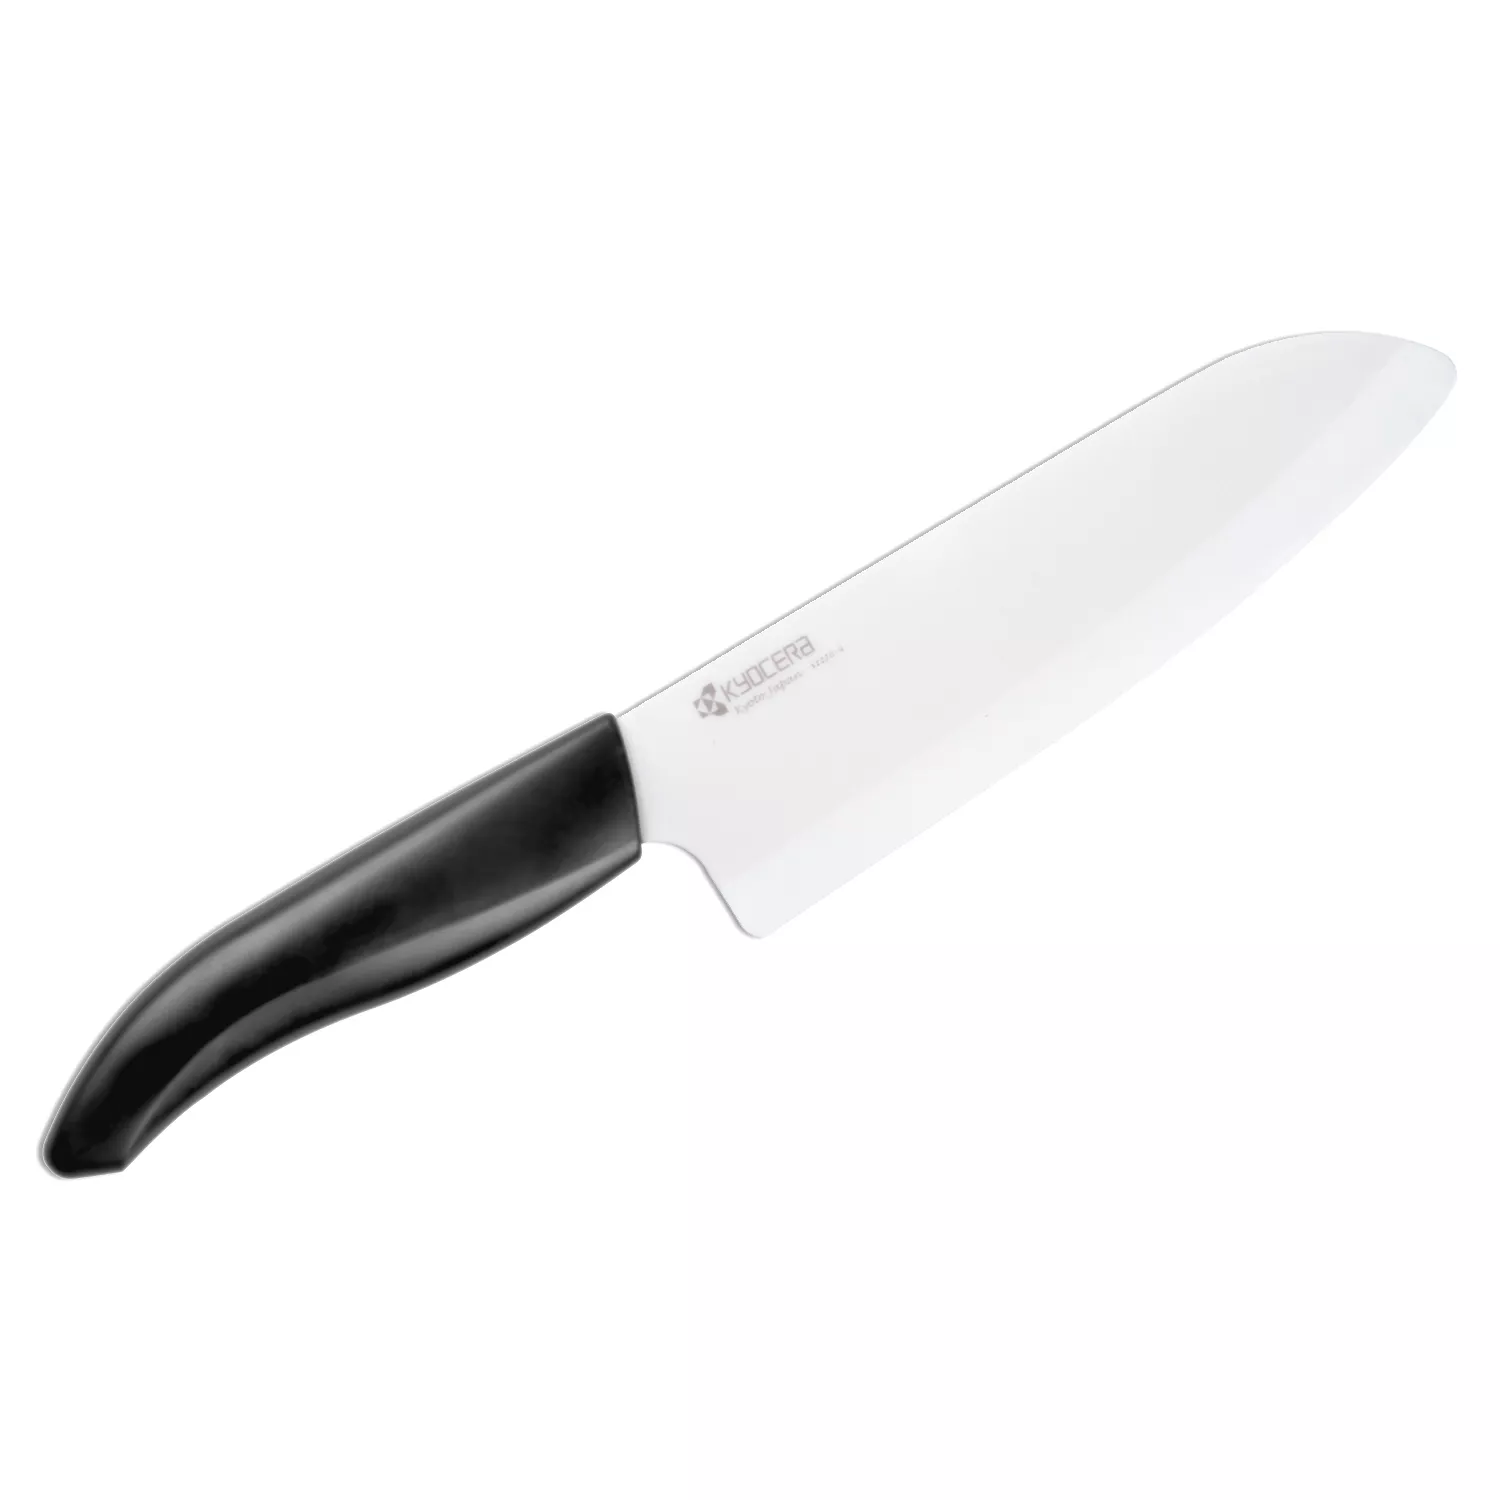 Ceramic Knives: A Complete Guide to Ceramic Blades